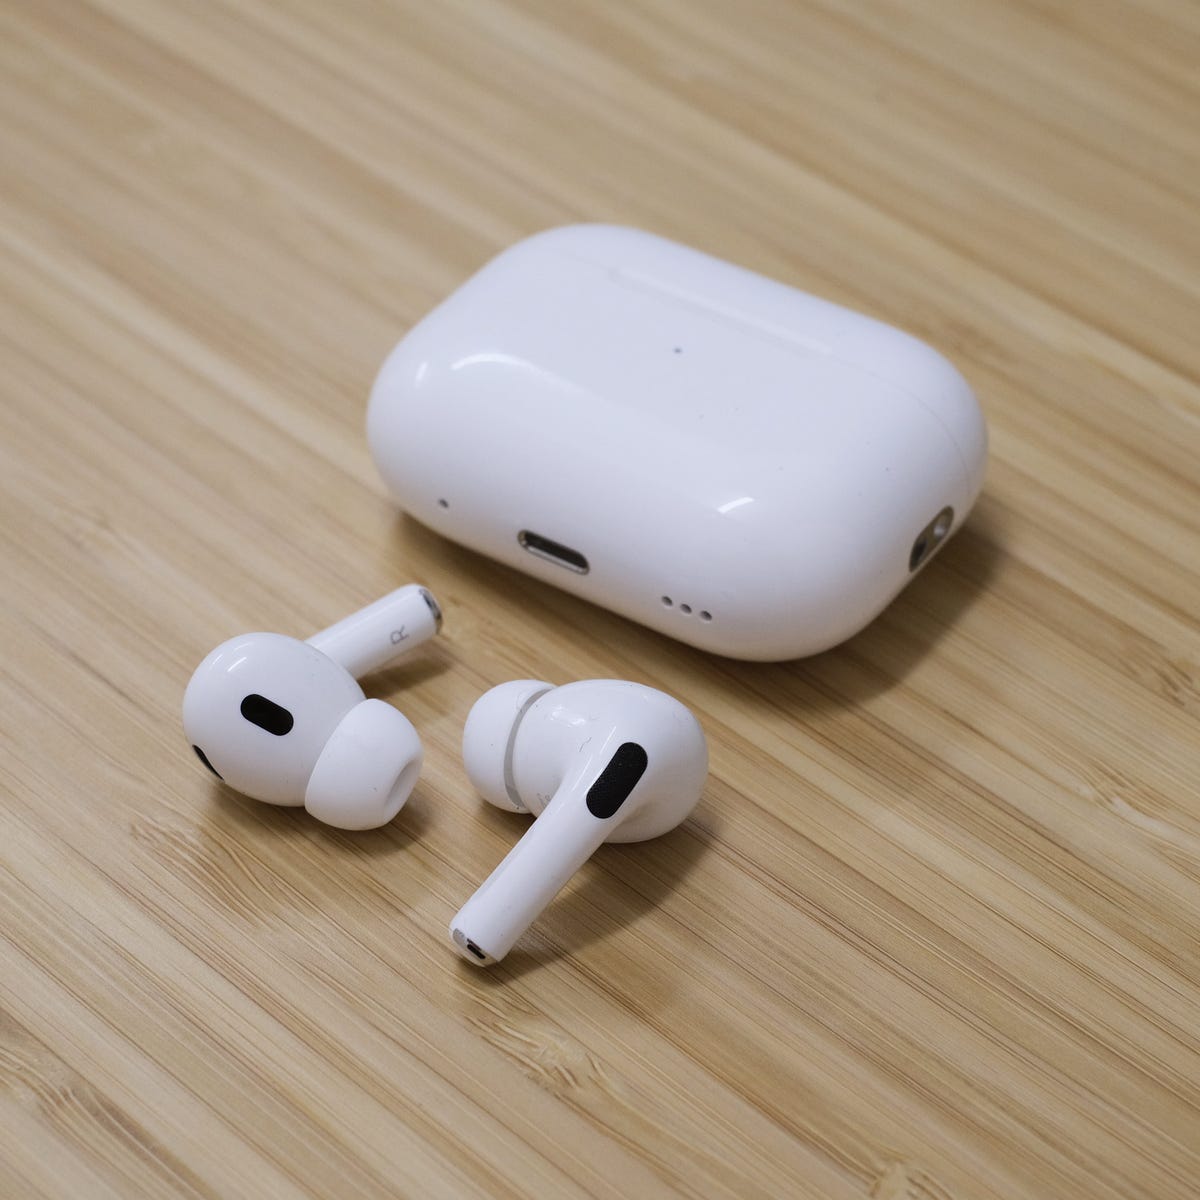 Apple AirPods Pro 2nd Gen: 6 tips and tricks to get the most out of Apple's newest wireless earbuds | ZDNET